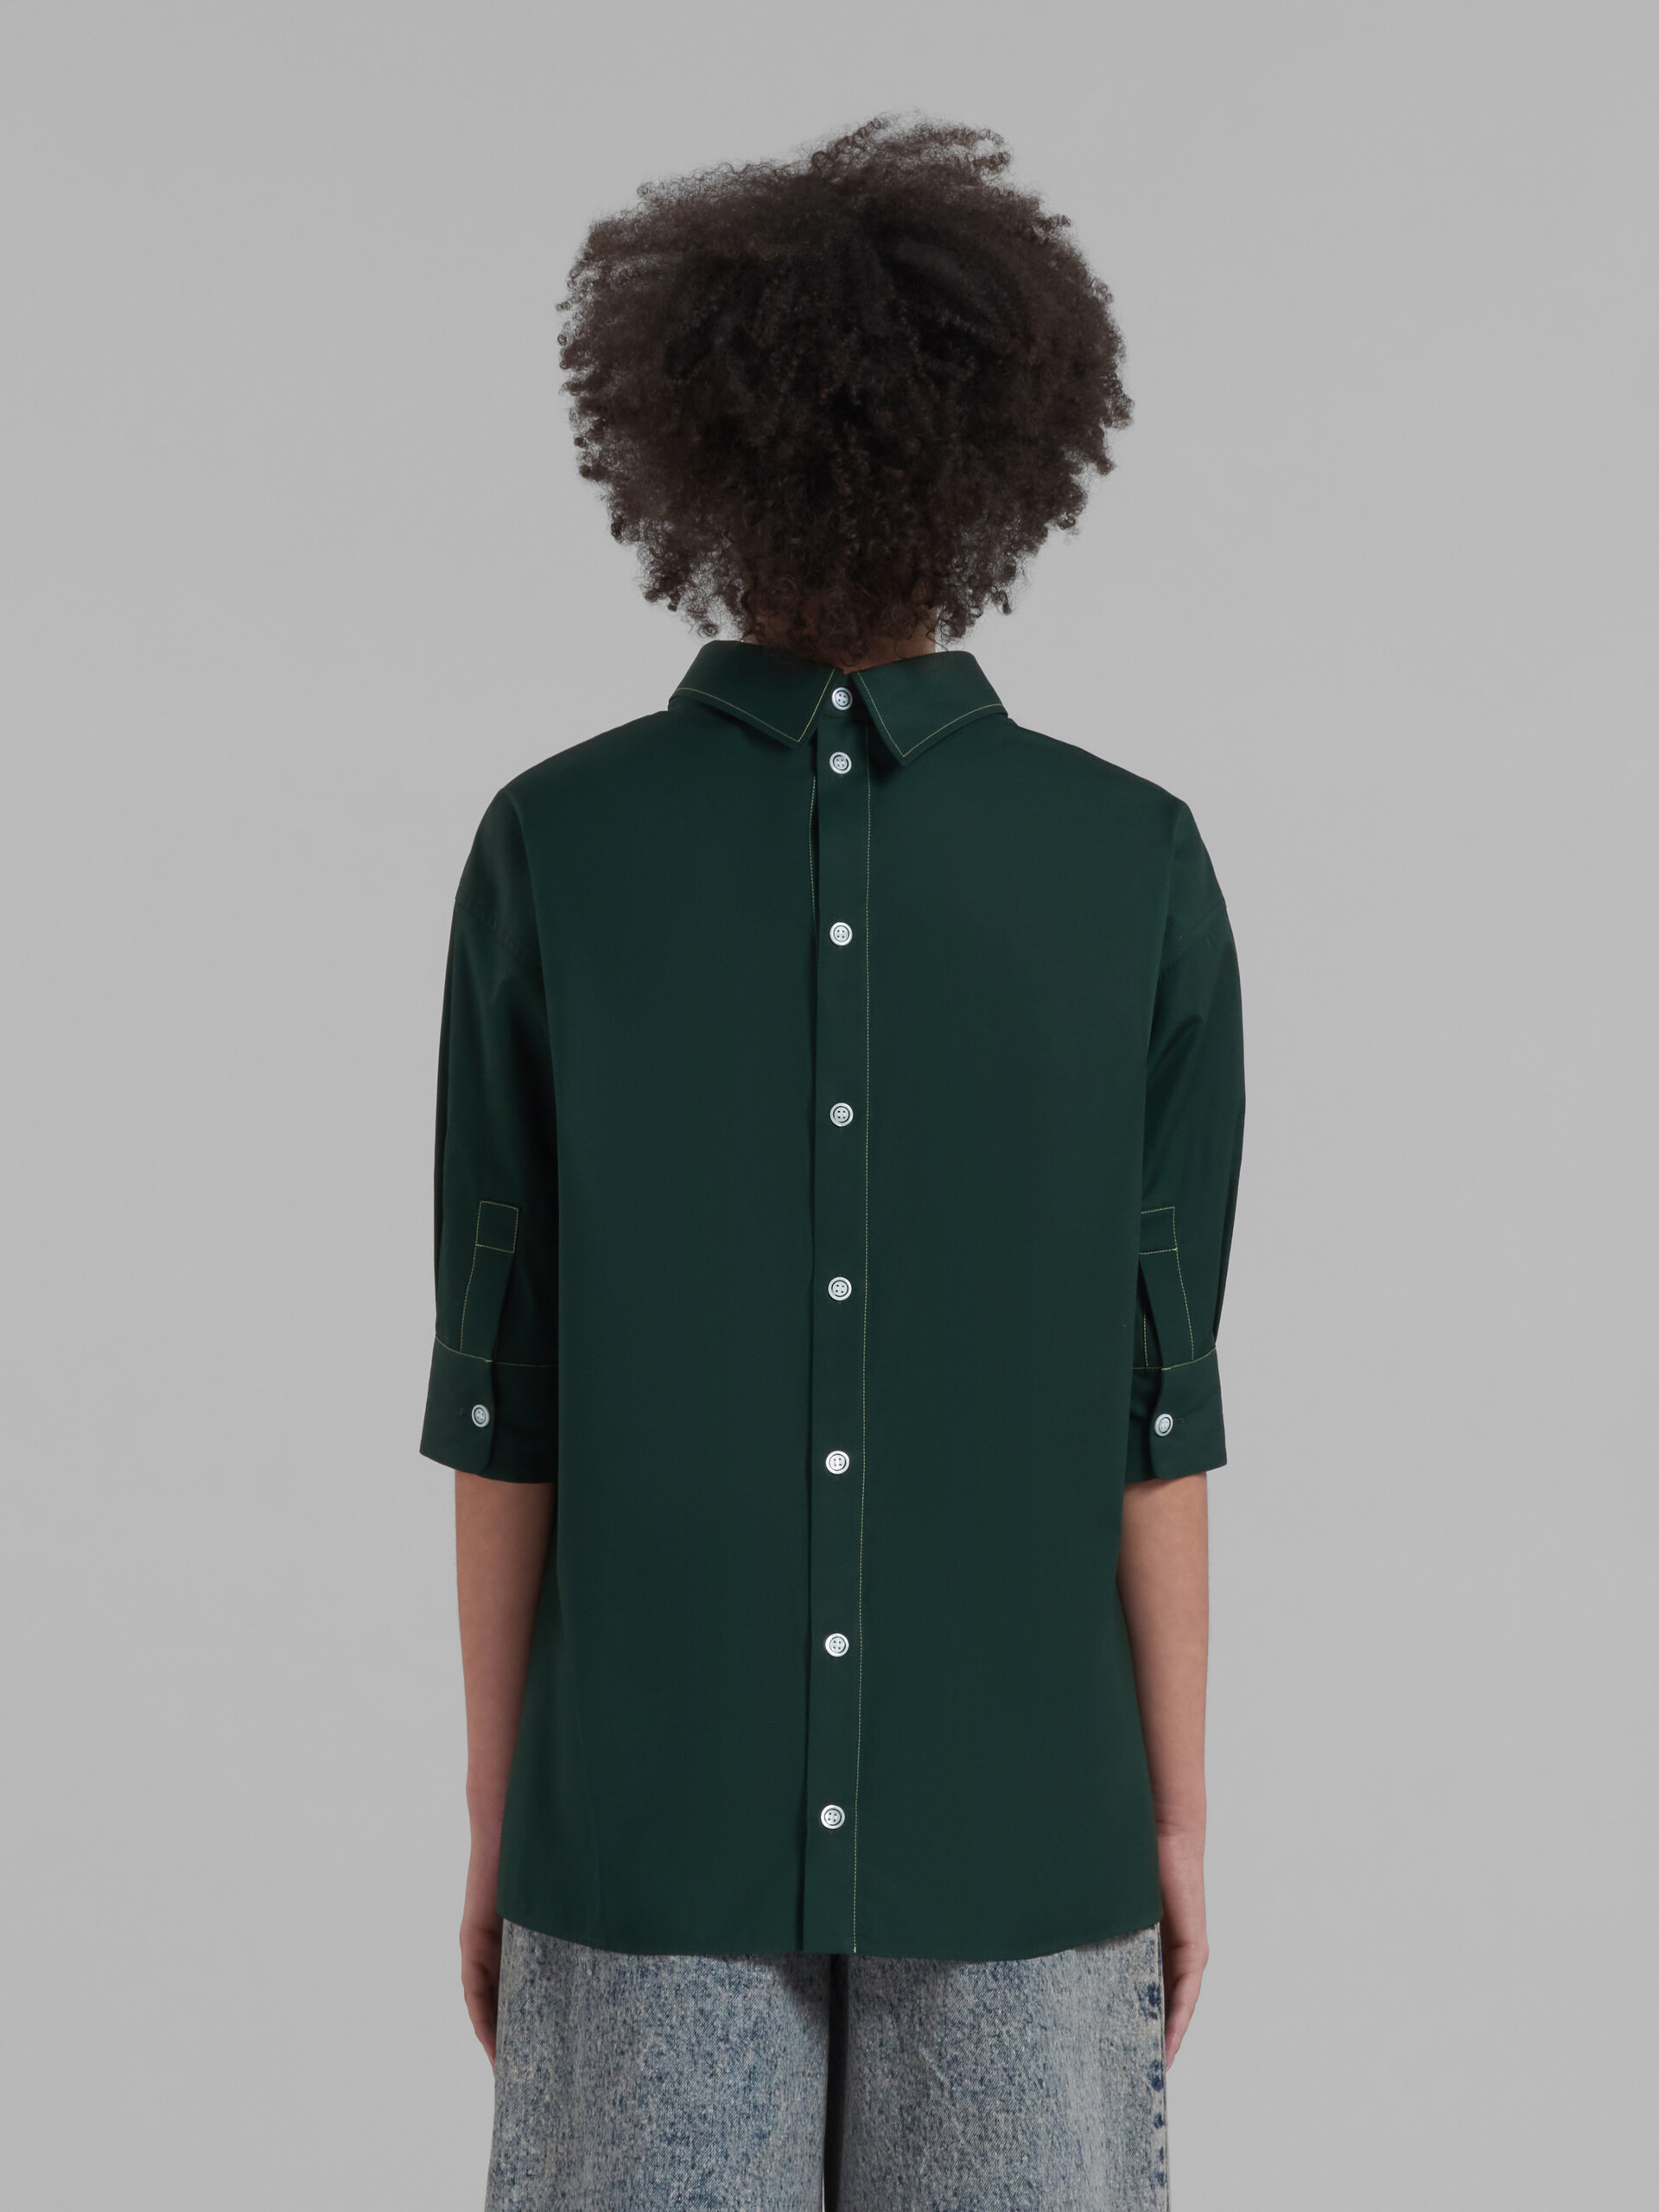 Green organic poplin top with open back - Shirts - Image 3